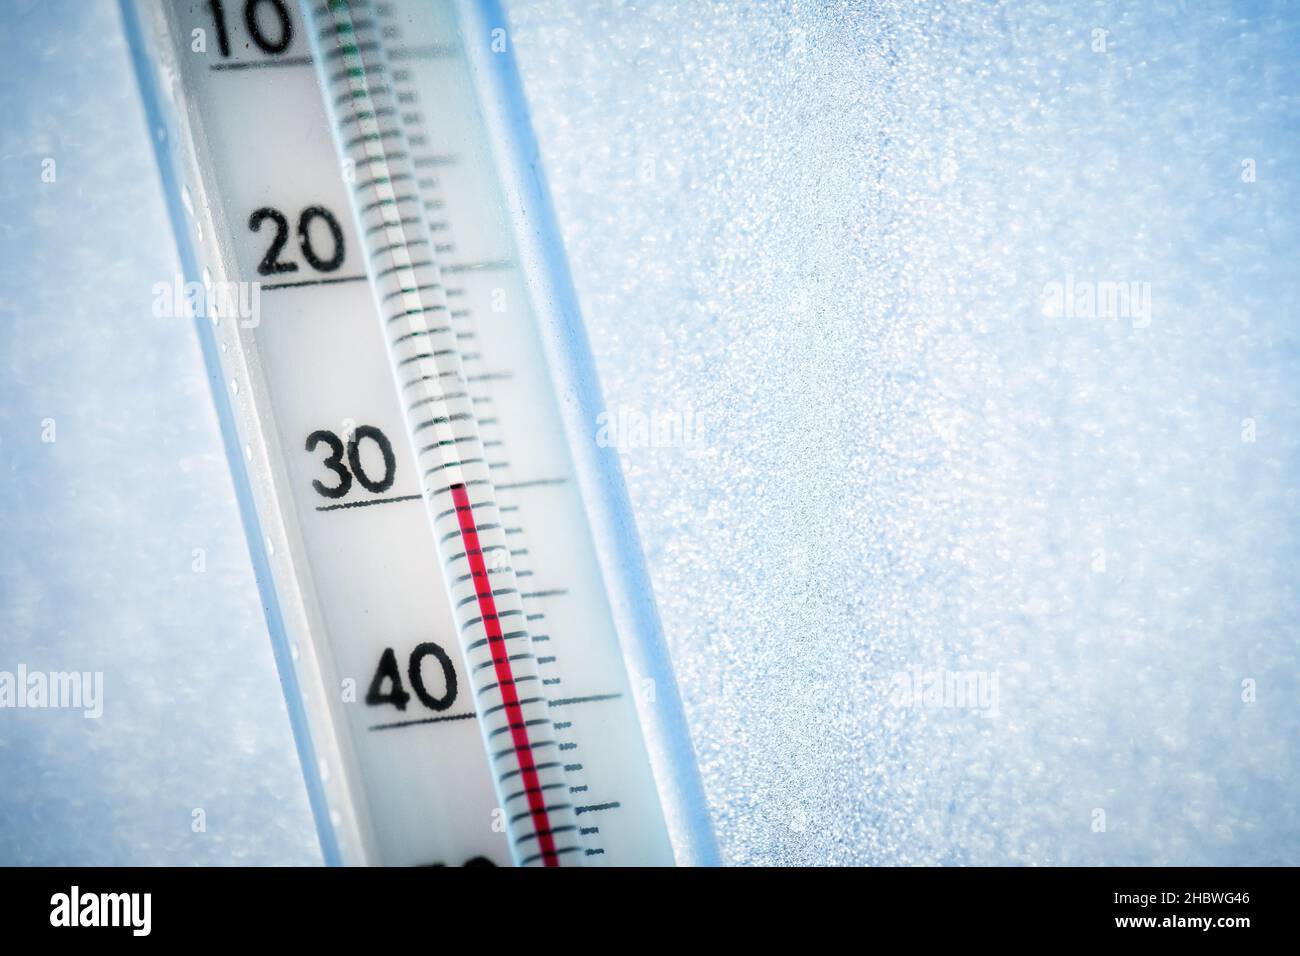 The thermometer shows a low temperature of minus 30 Celsius. Weather forecast. A frosty day and ice patterns on the glass Stock Photo